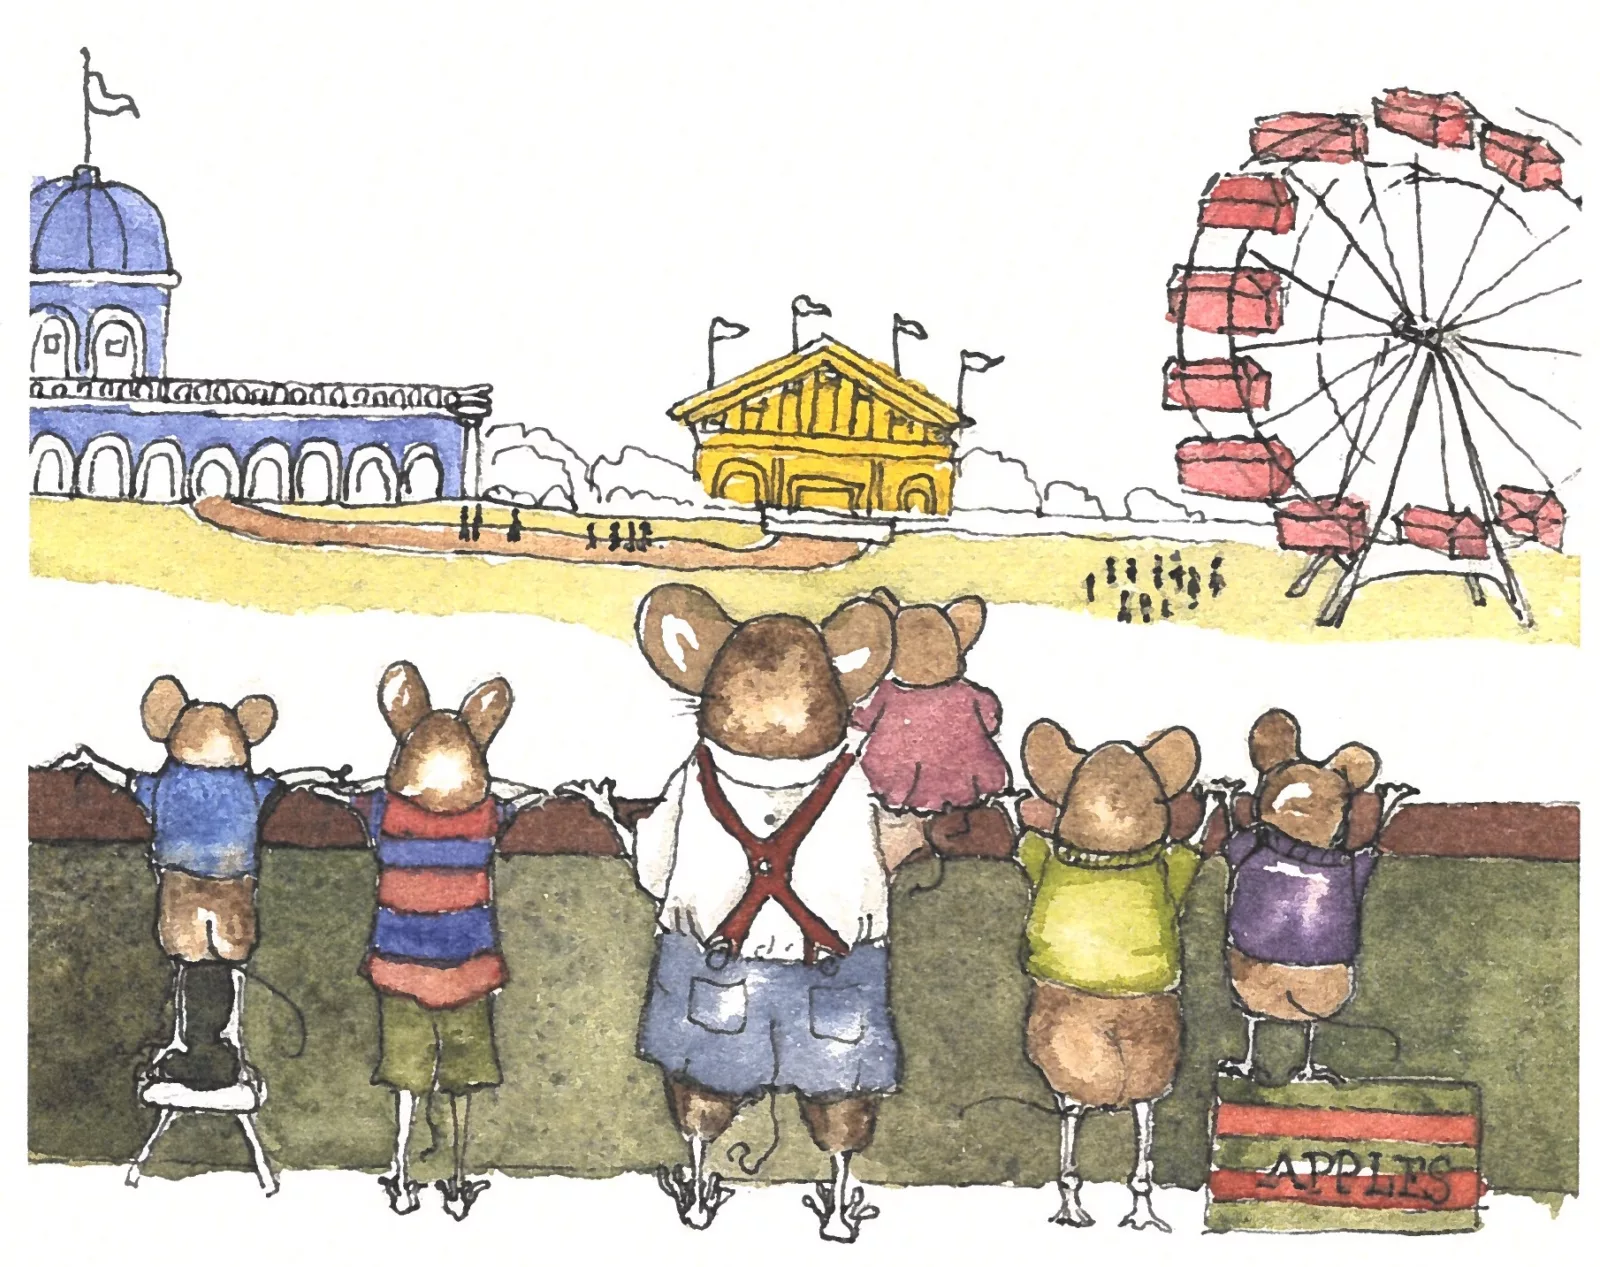 From The Mouse with Wheels in His Head, by Gene Bradbury with illustrations by Victoria Wickell-Stewart